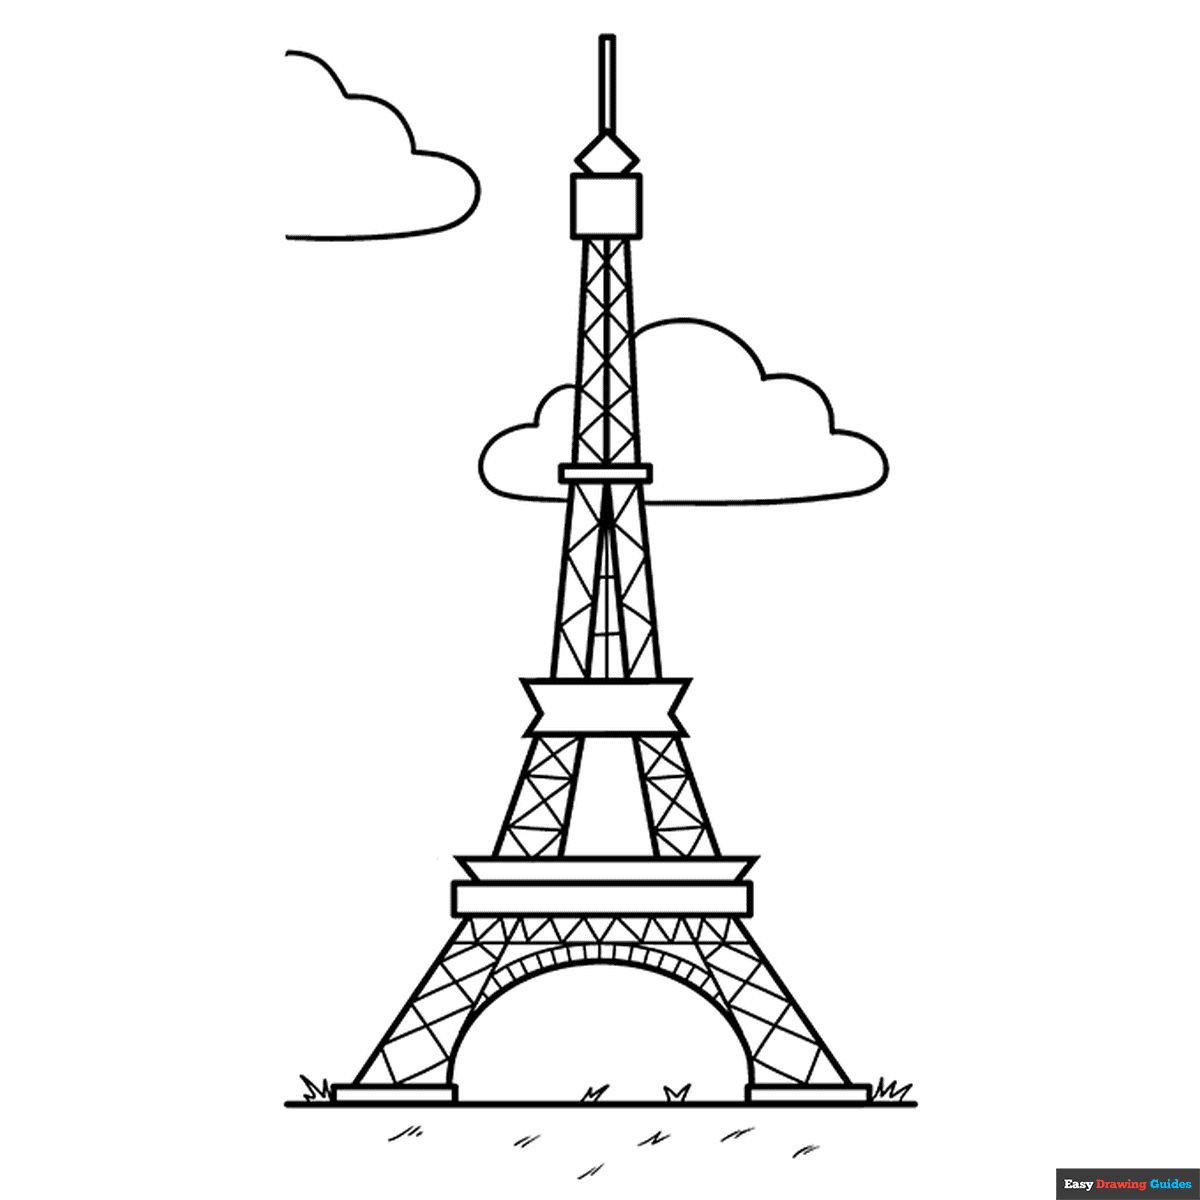 Eiffel tower coloring page easy drawing guides